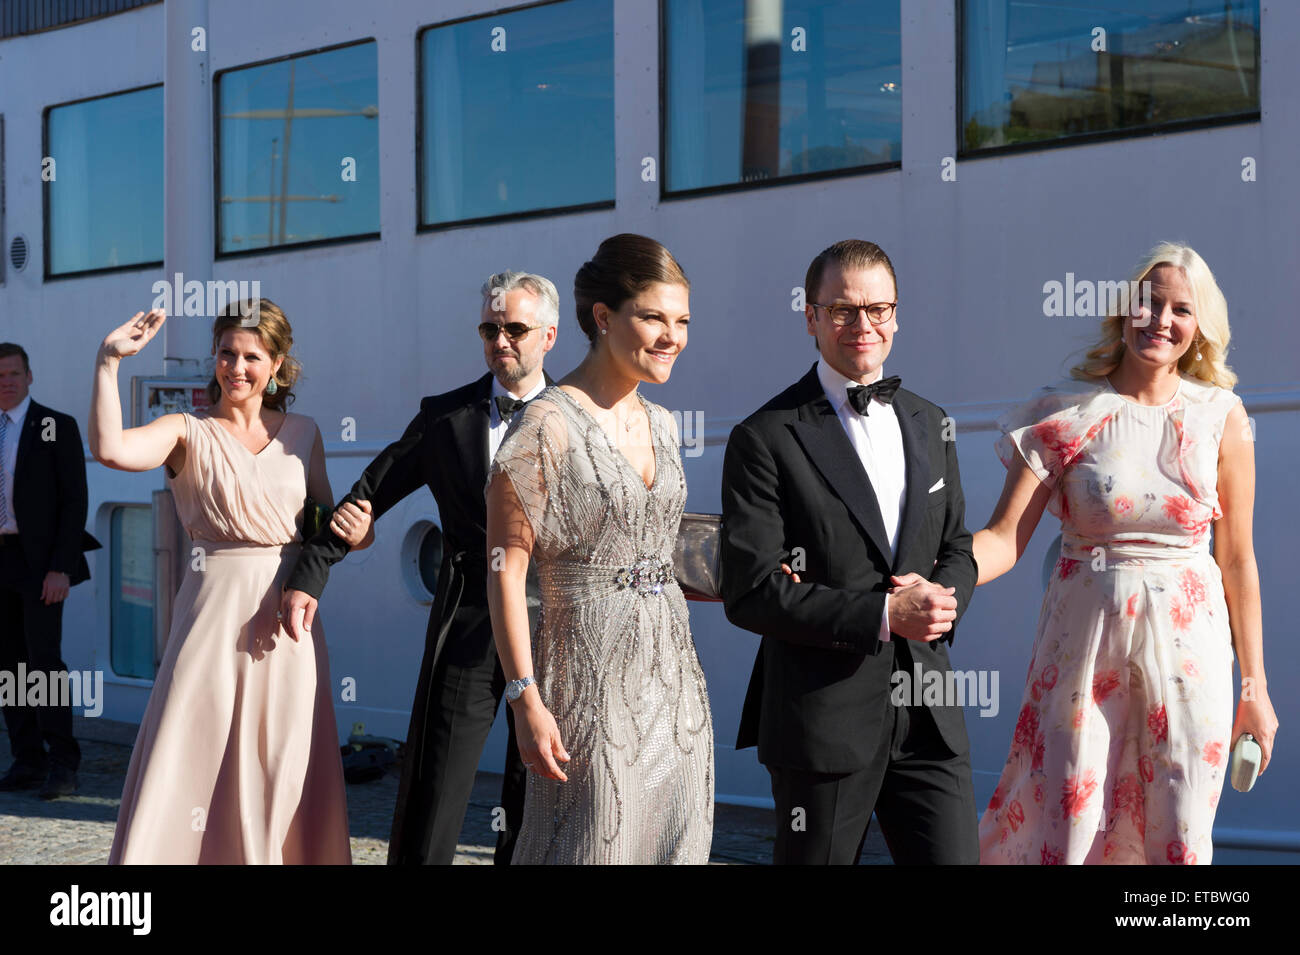 Stockholm, Sweden, June, 12, 2015. Private guests arrives at Strandvagen, Stockholm to board the Archipelago ship s/s Stockholm for further transport to the festivities. This is the start of the celebration of the marriage between Prince Carl Philip and Ms Sofia Hellqvist that will take place tomorrow at the Royal Chapel, Stockholm. Princess Martha Louise, and Mr Ari Behn, Norway, Crown Princess Victoria and Prince Daniel, Sweden, Crown Princess Mette-Marit, Norway (left to right). Credit:  Barbro Bergfeldt/Alamy Live News Stock Photo